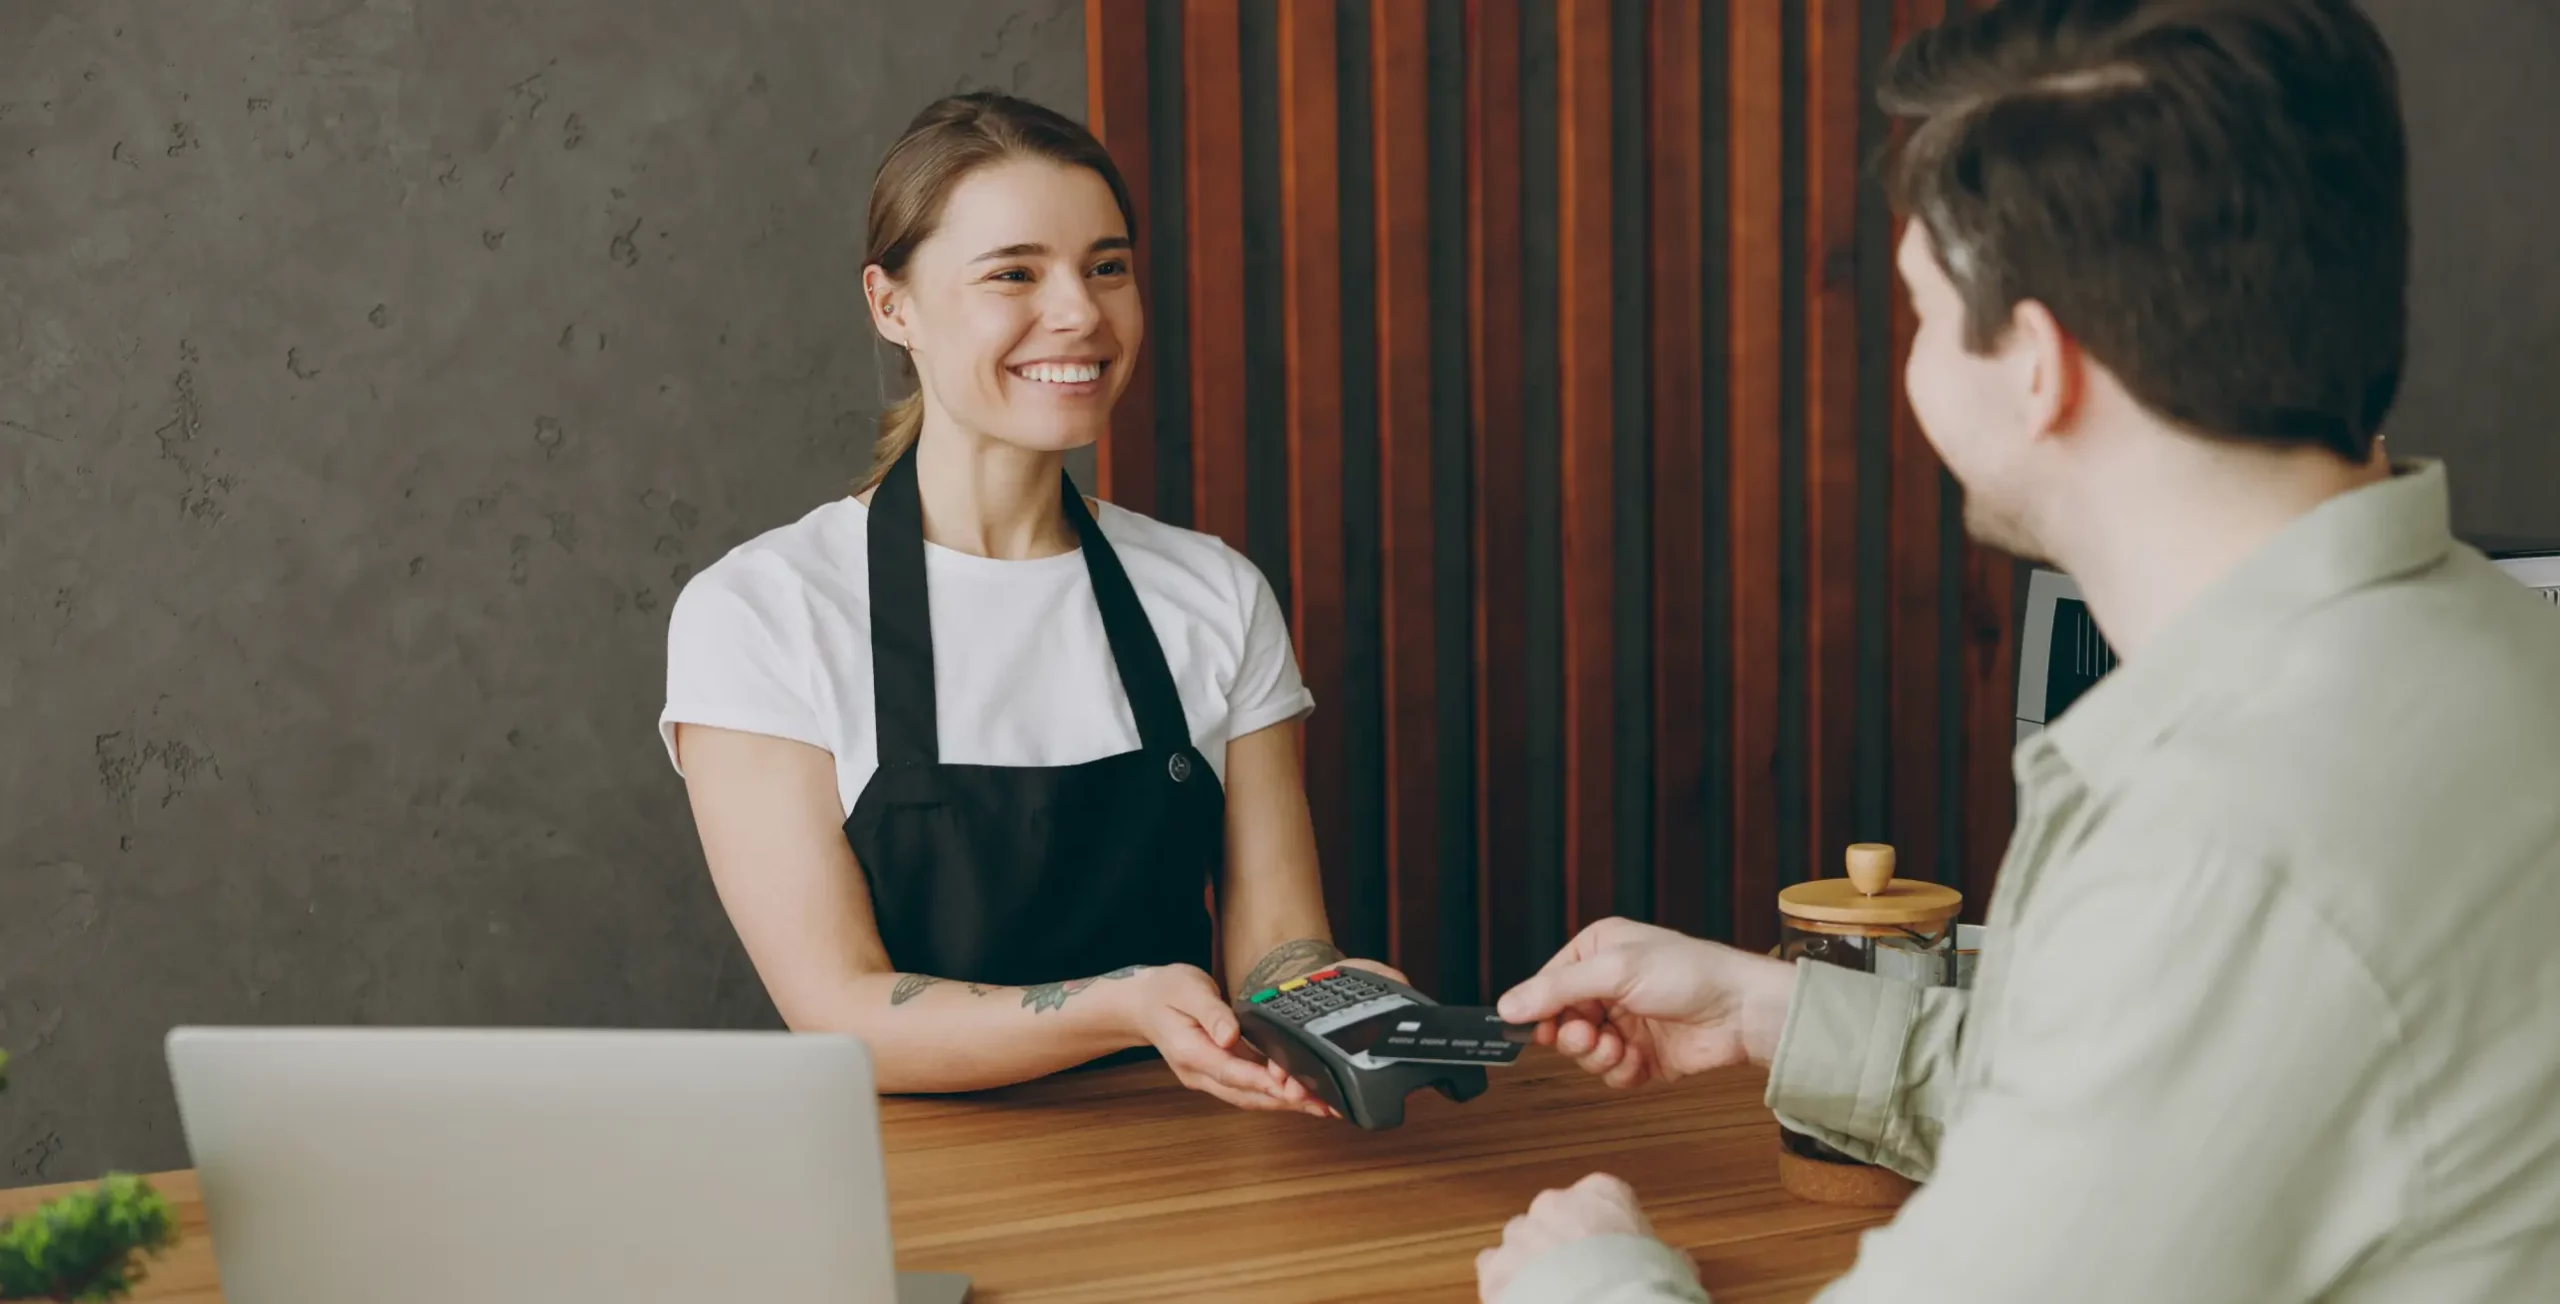 Passing on credit card fees to customers: Is it right for your business?